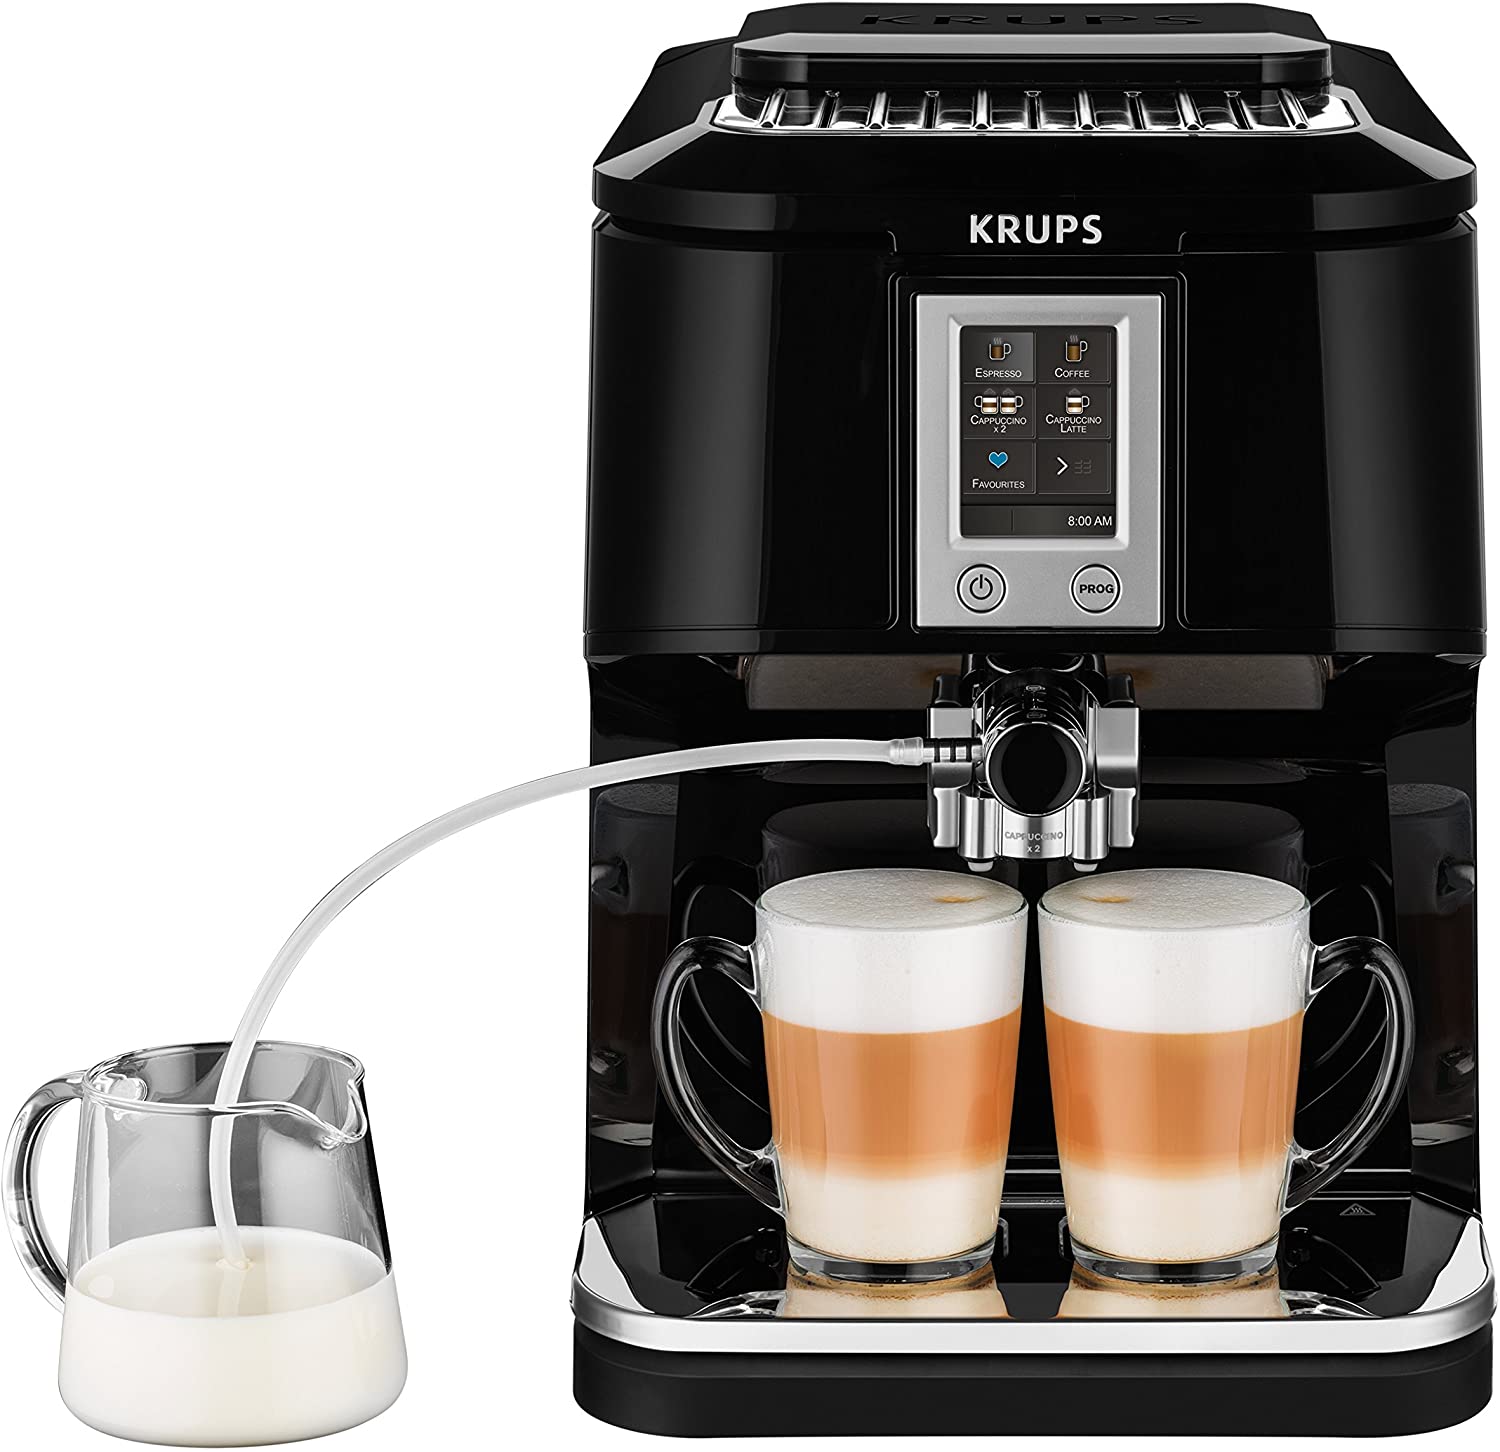 Krups EA8808 Fully Automatic Coffee Machine with Two in One Touch Function, 15 Bar, Touchscreen Colour Display, Stainless Steel / Black